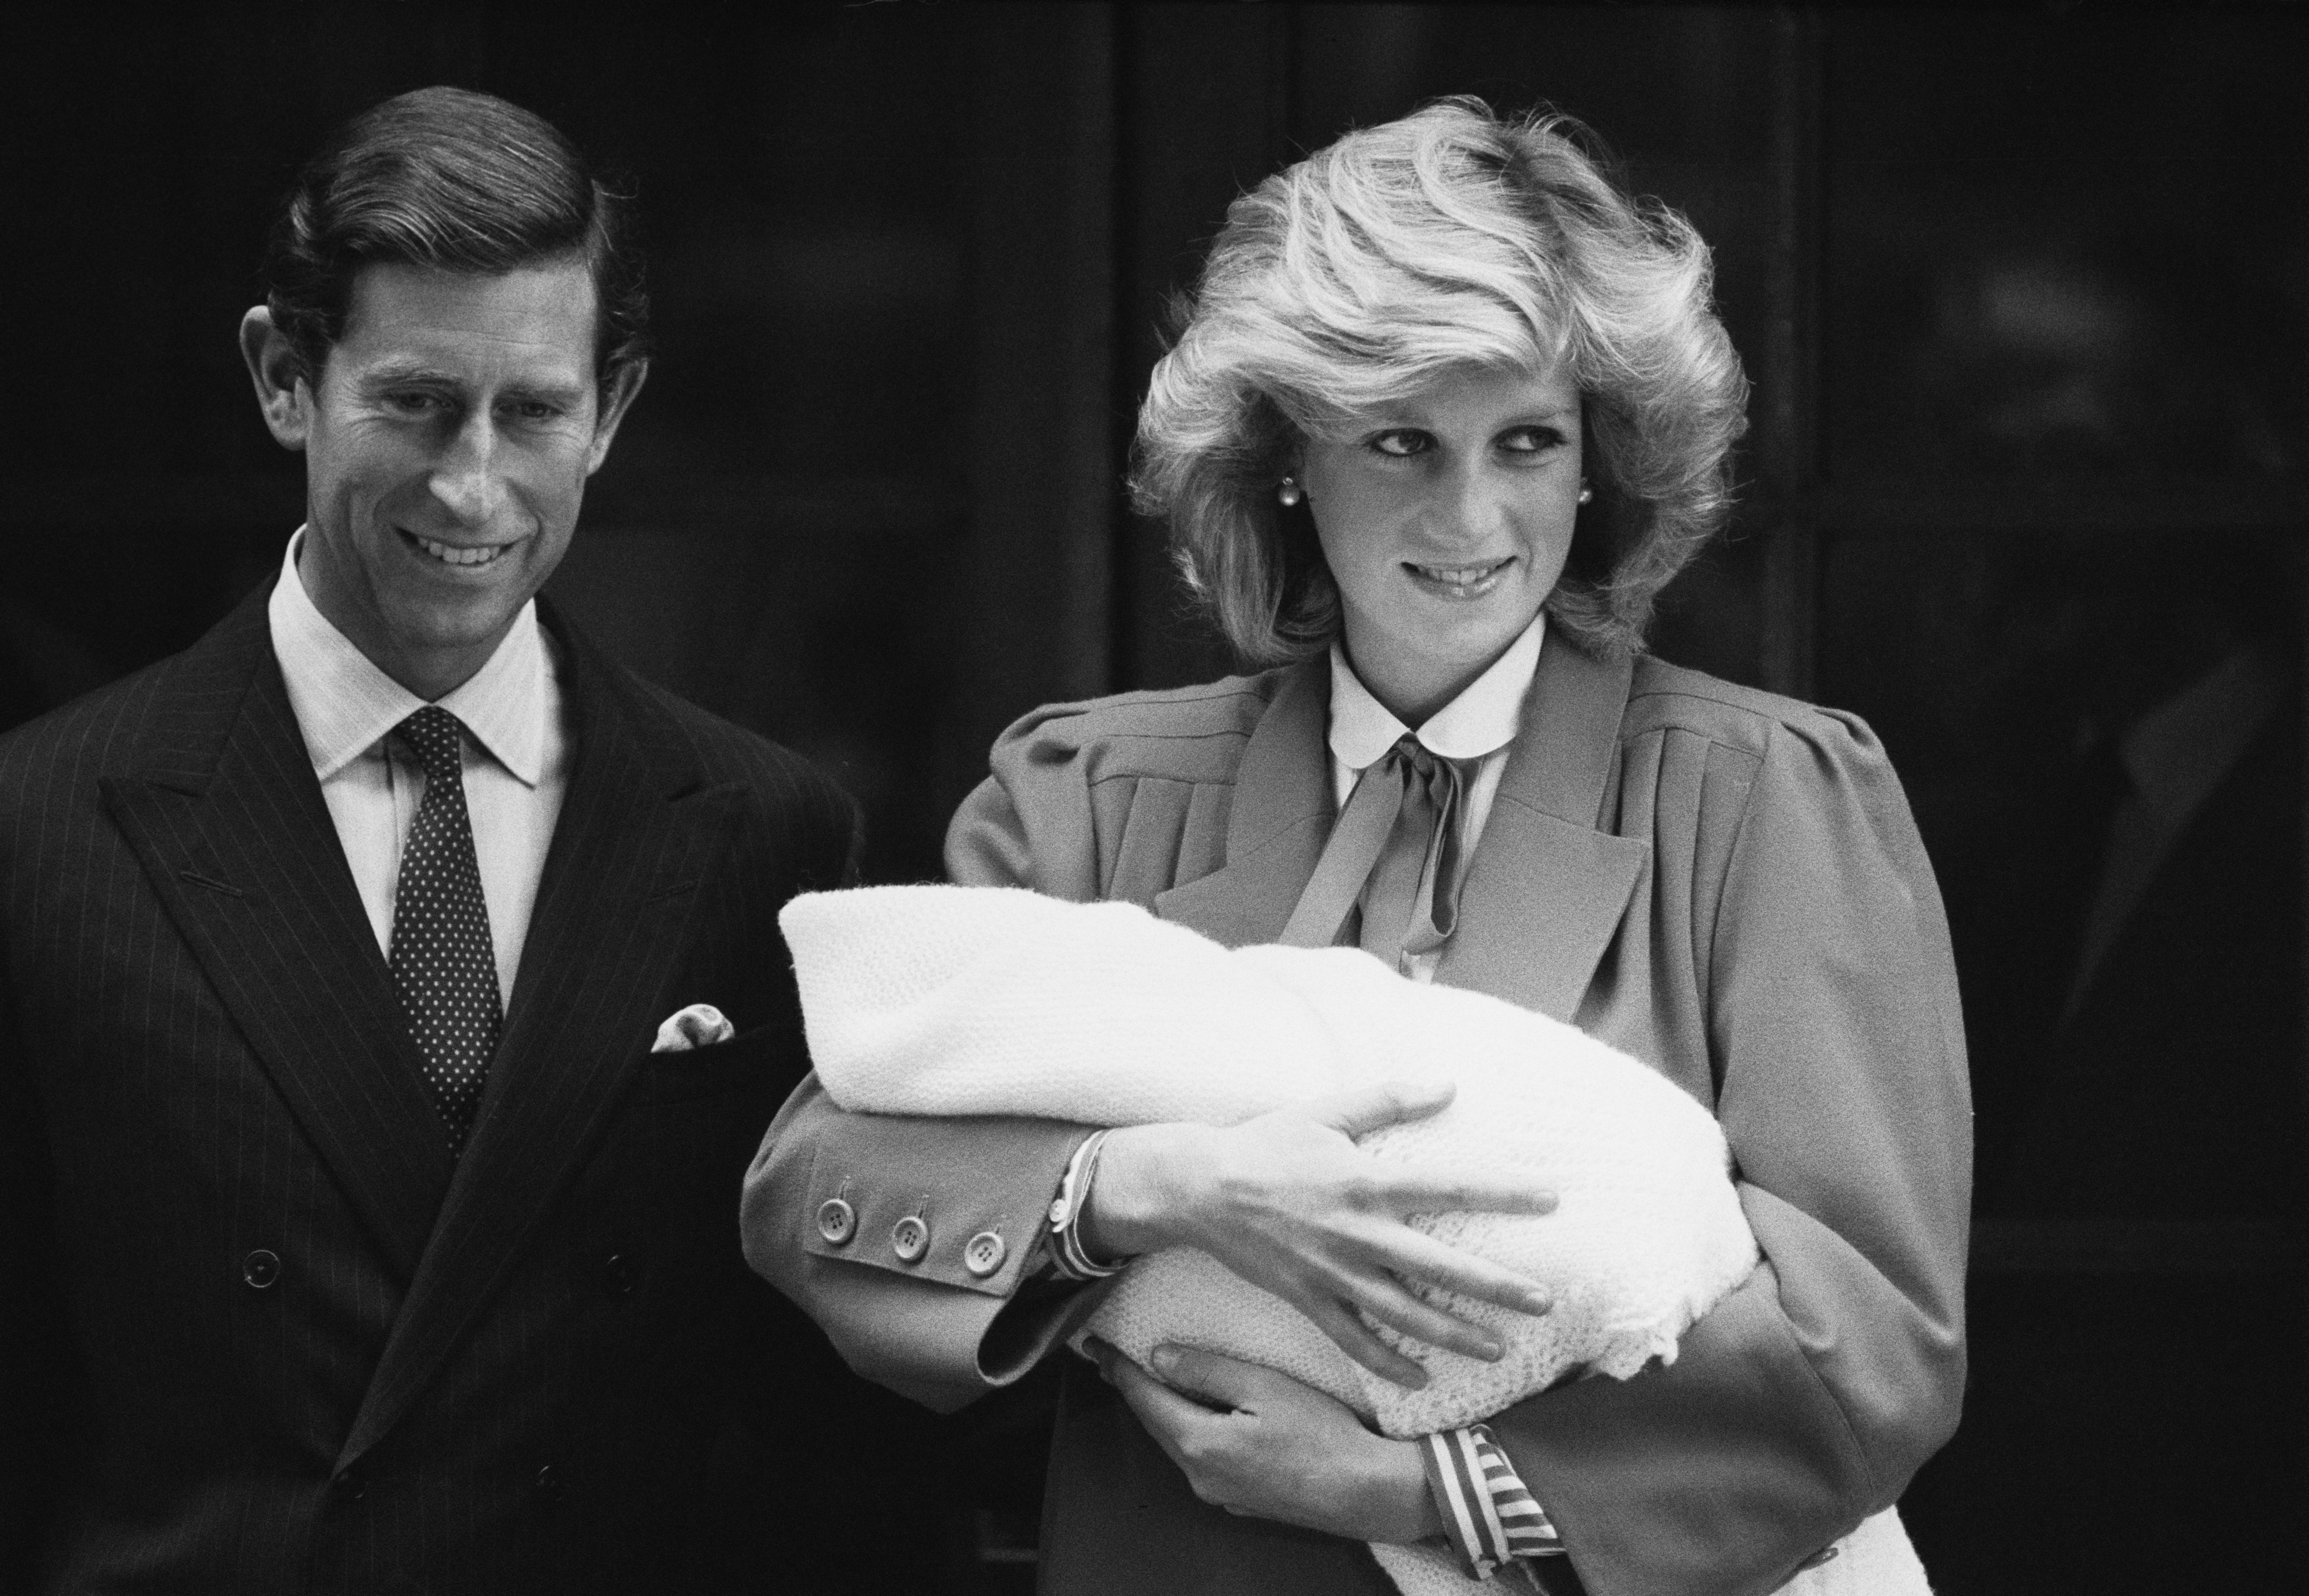 Diana Princess of Wales (1961 - 1997) and Prince Charles with newborn Prince Harry, leave St Mary's Hospital in Paddington, London, UK, 16th September 1984; Diana wore an outfit designed by Jan Van Velden. | Source: Getty Images